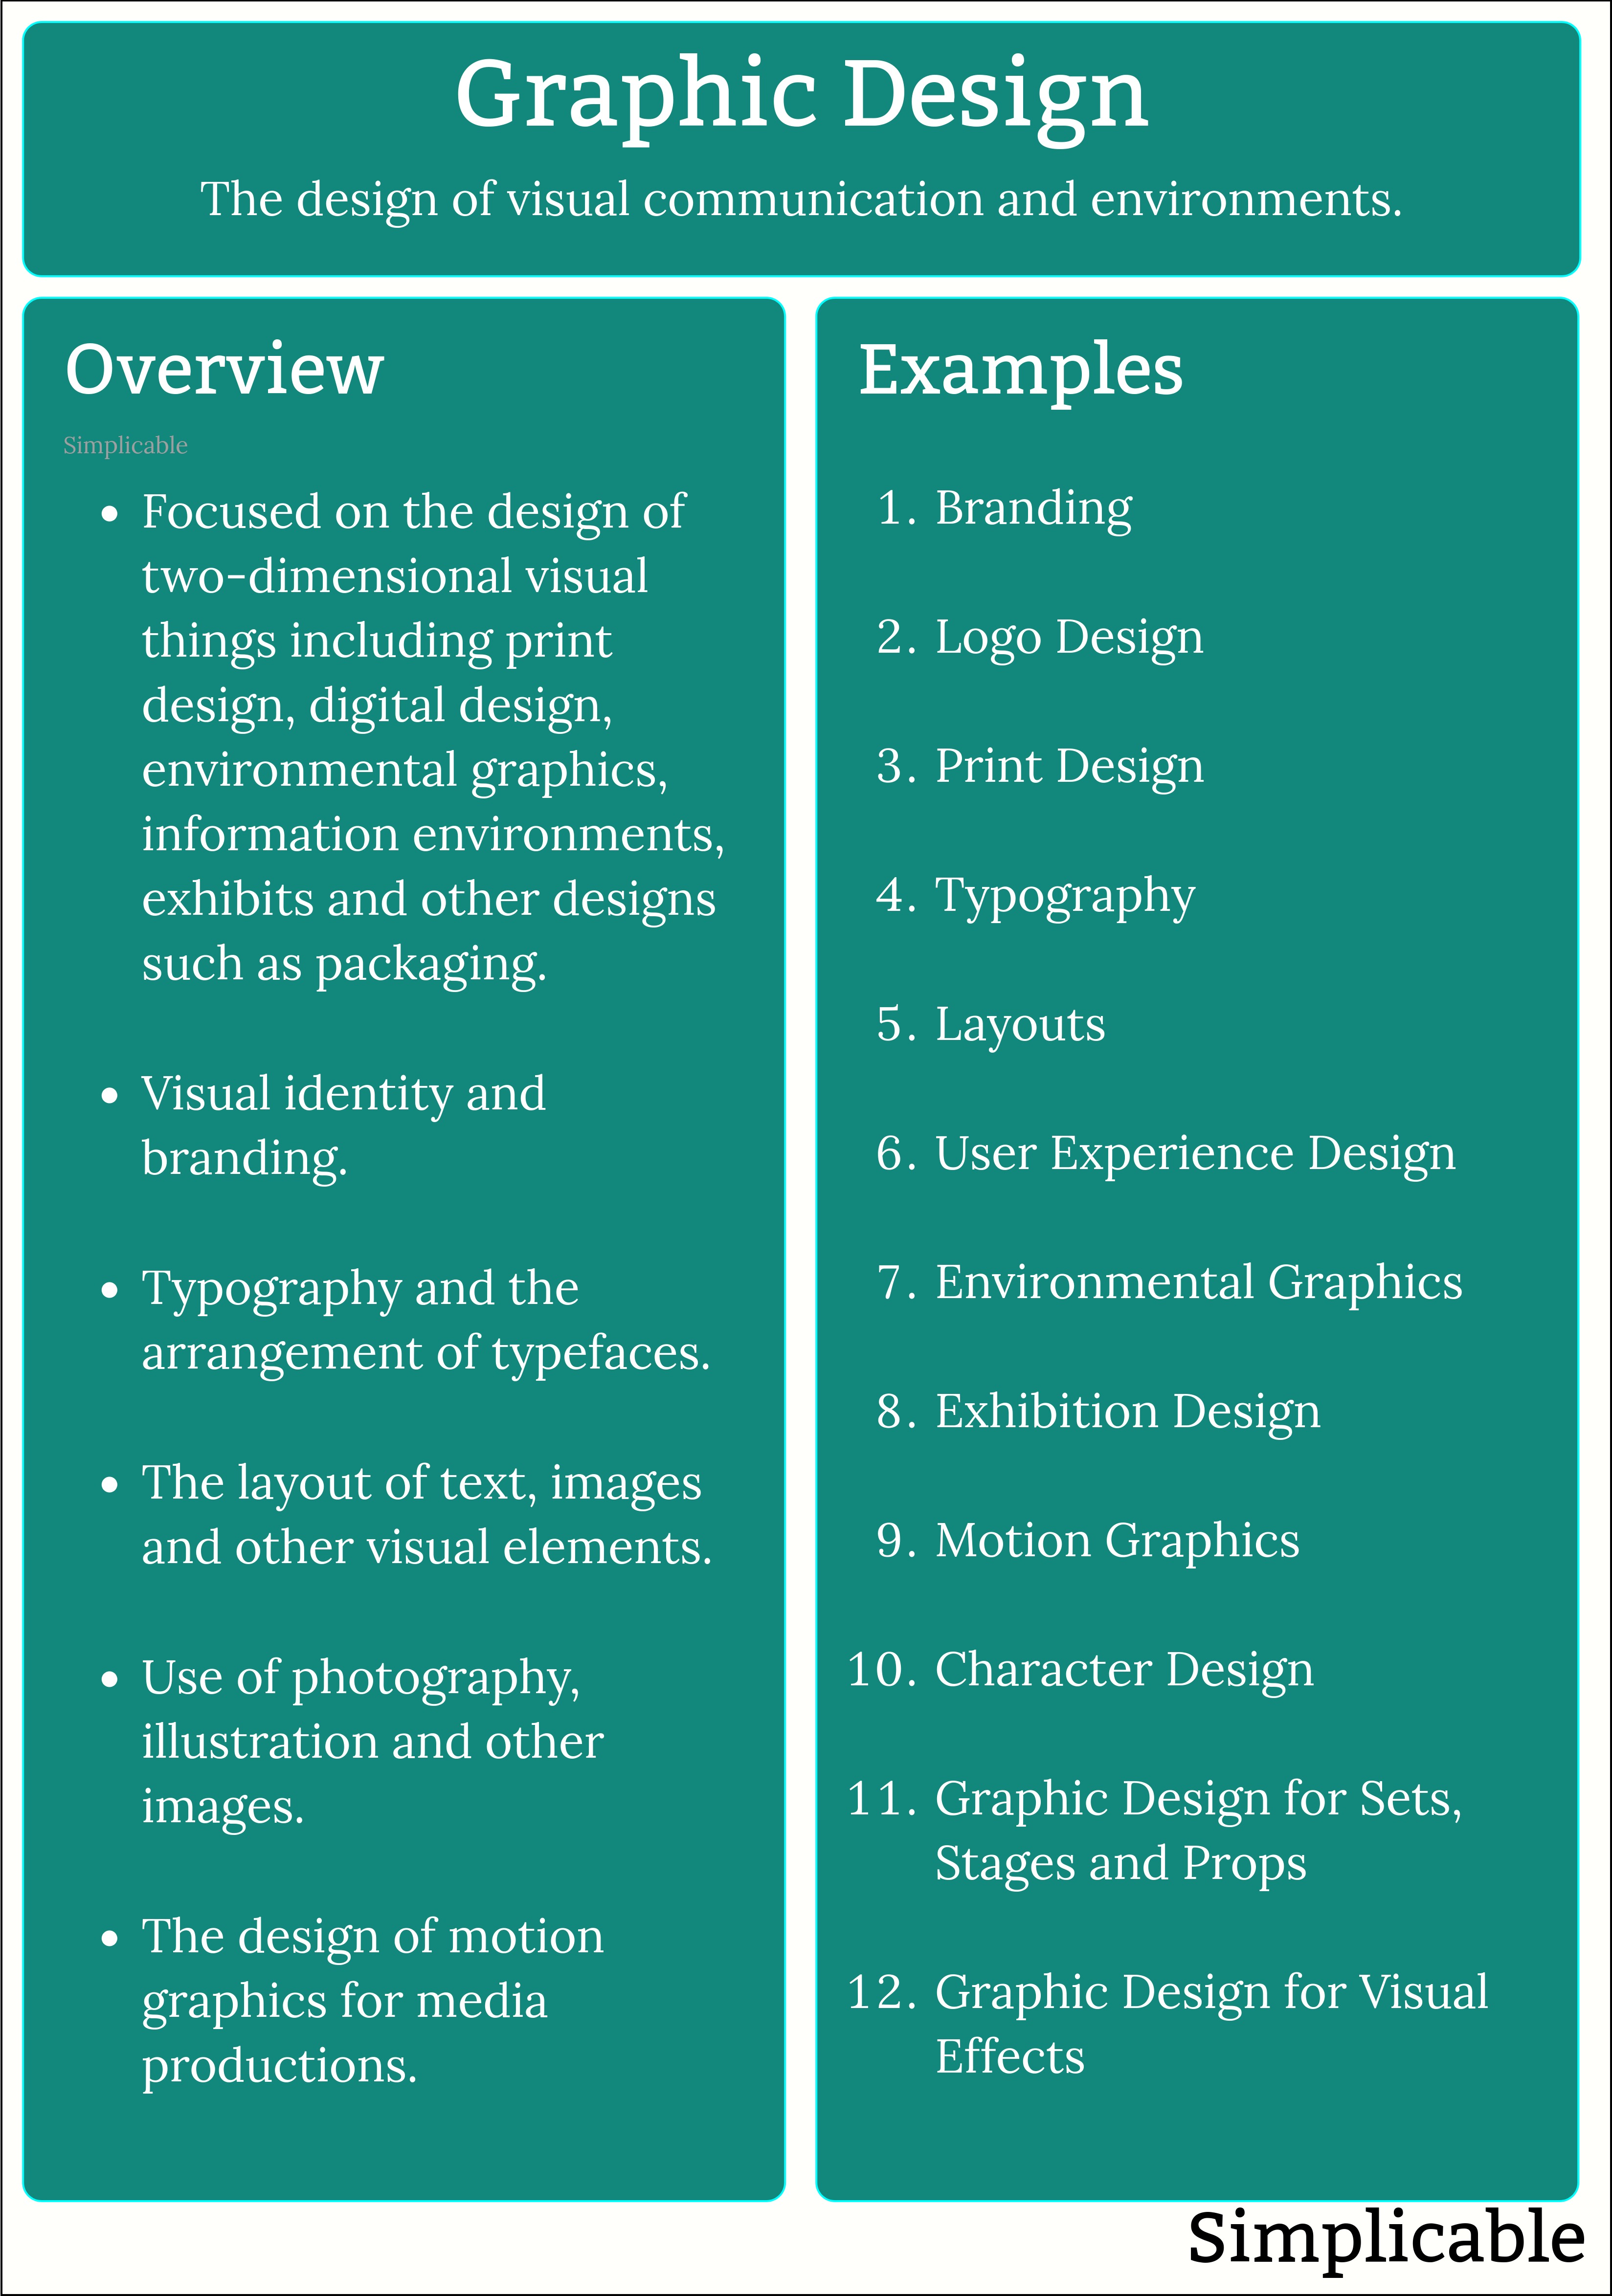 graphic design overview and examples